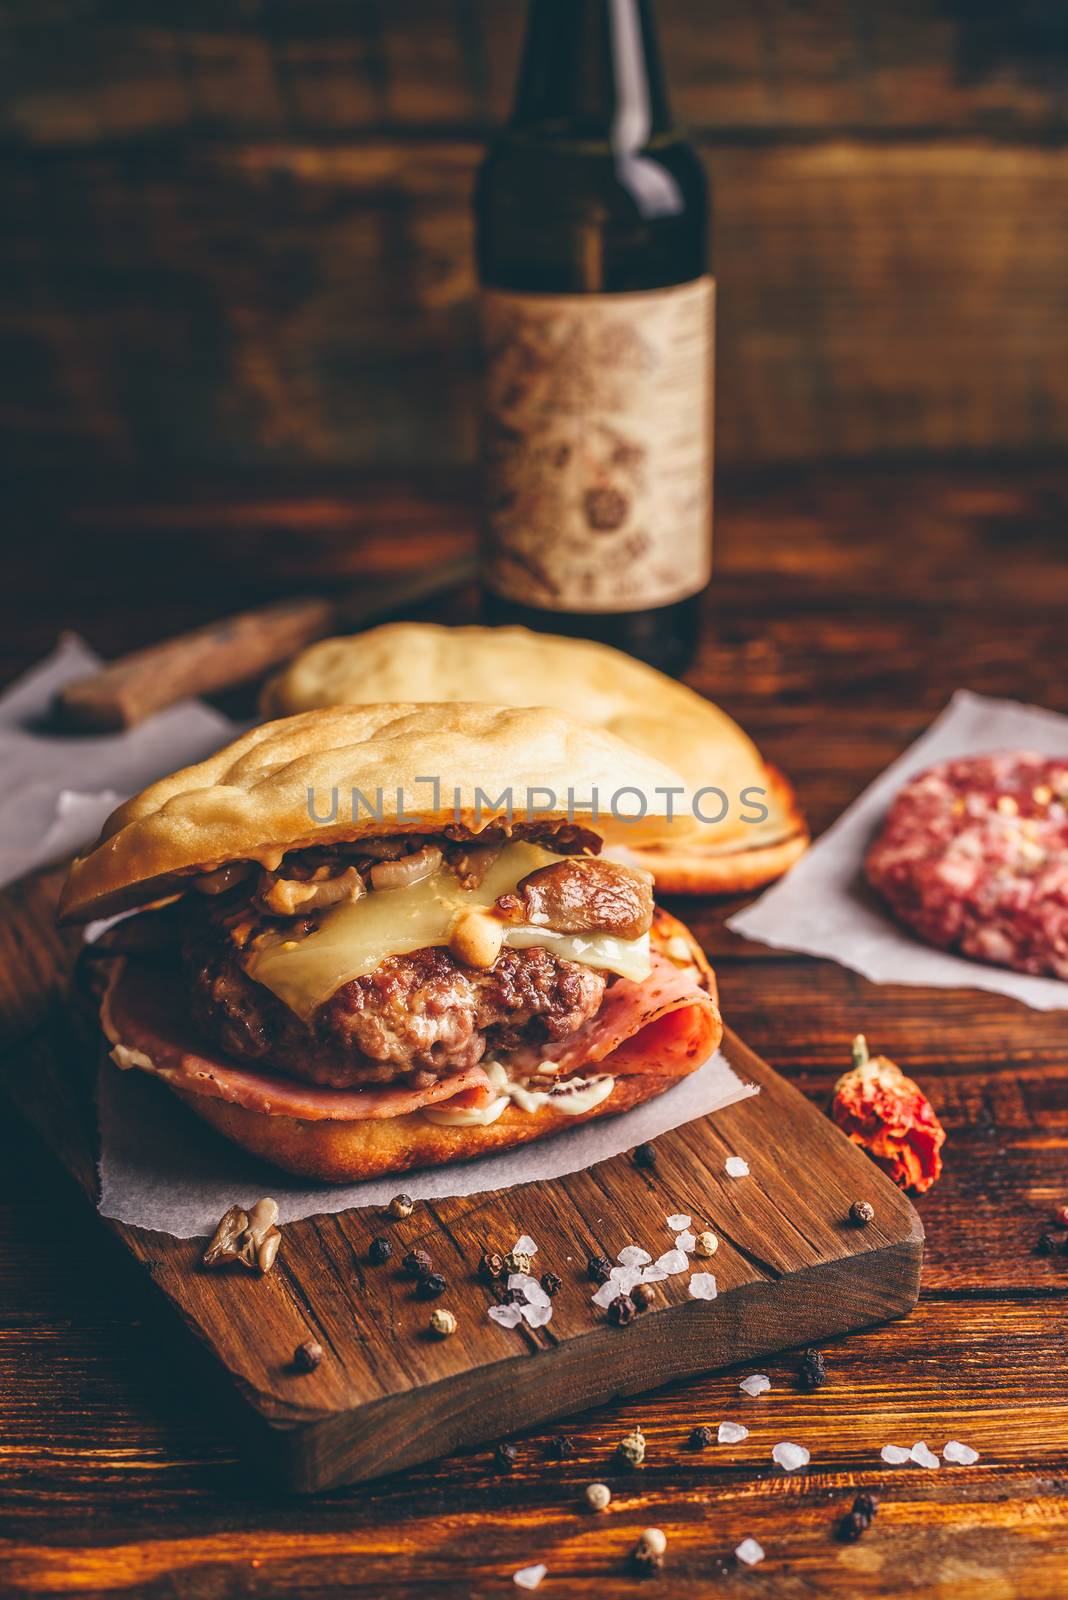 Homemade Burger on Cutting Board. Cheeseburger with Beef Patty, Wisconsin Swiss Cheese, Ham, Sauteed Mushrooms, Dijon Mustard, Mayonnaise and Potato Roll. Bottle of Craft Beer on Background.